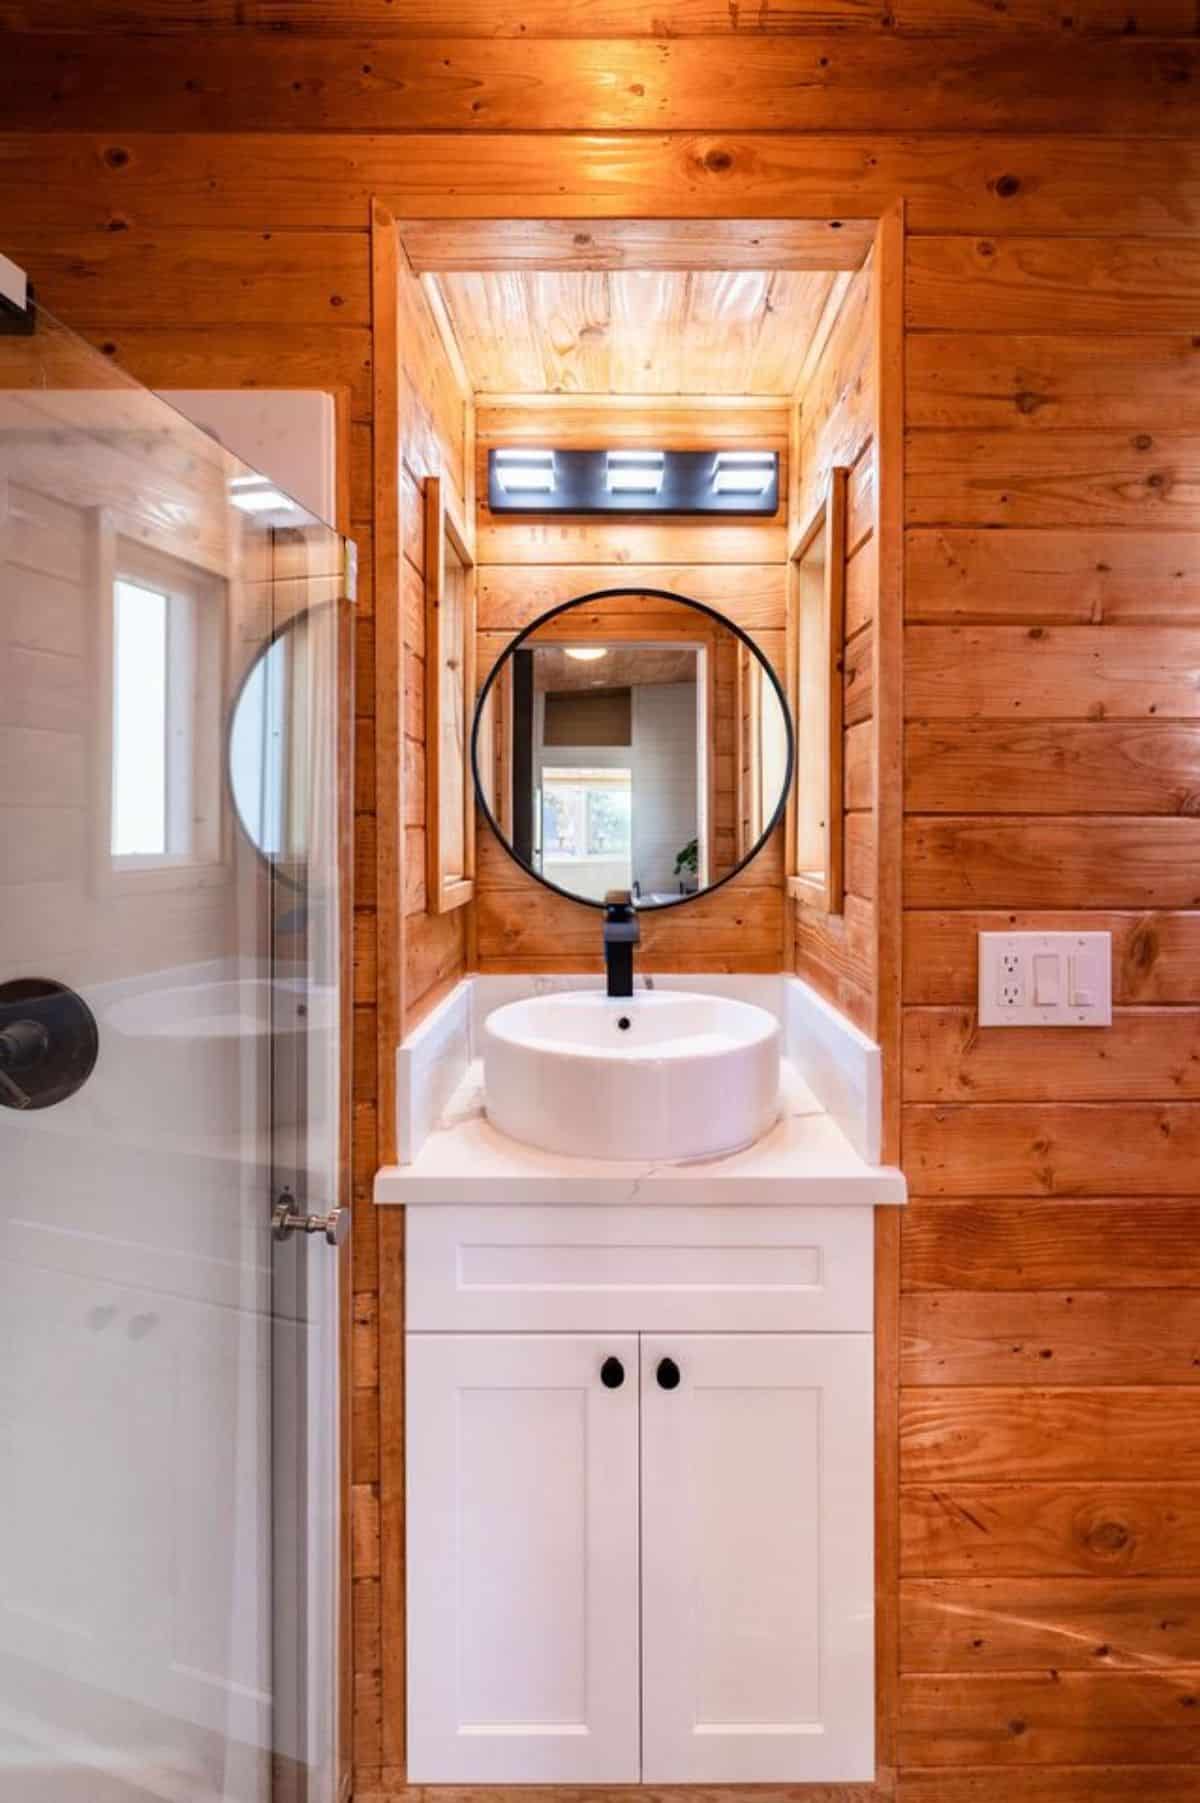 bathroom of brand new tiny home has all the standard fittings